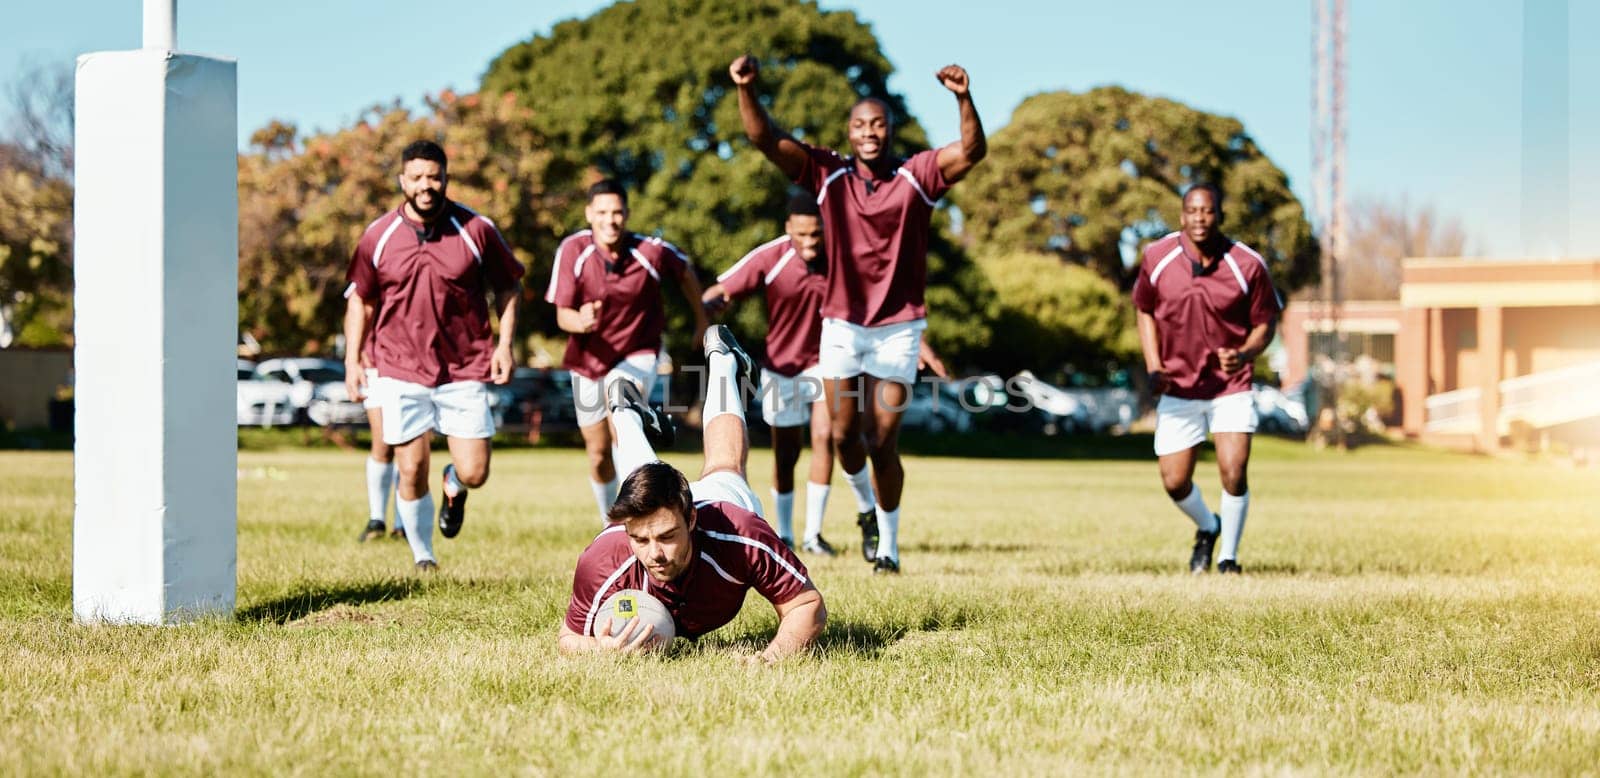 Rugby, team and sports game with men celebrate player scoring a try, fitness and active outdoor with cheers. Happy, winning and support with competition and exercise, championship match and energy.